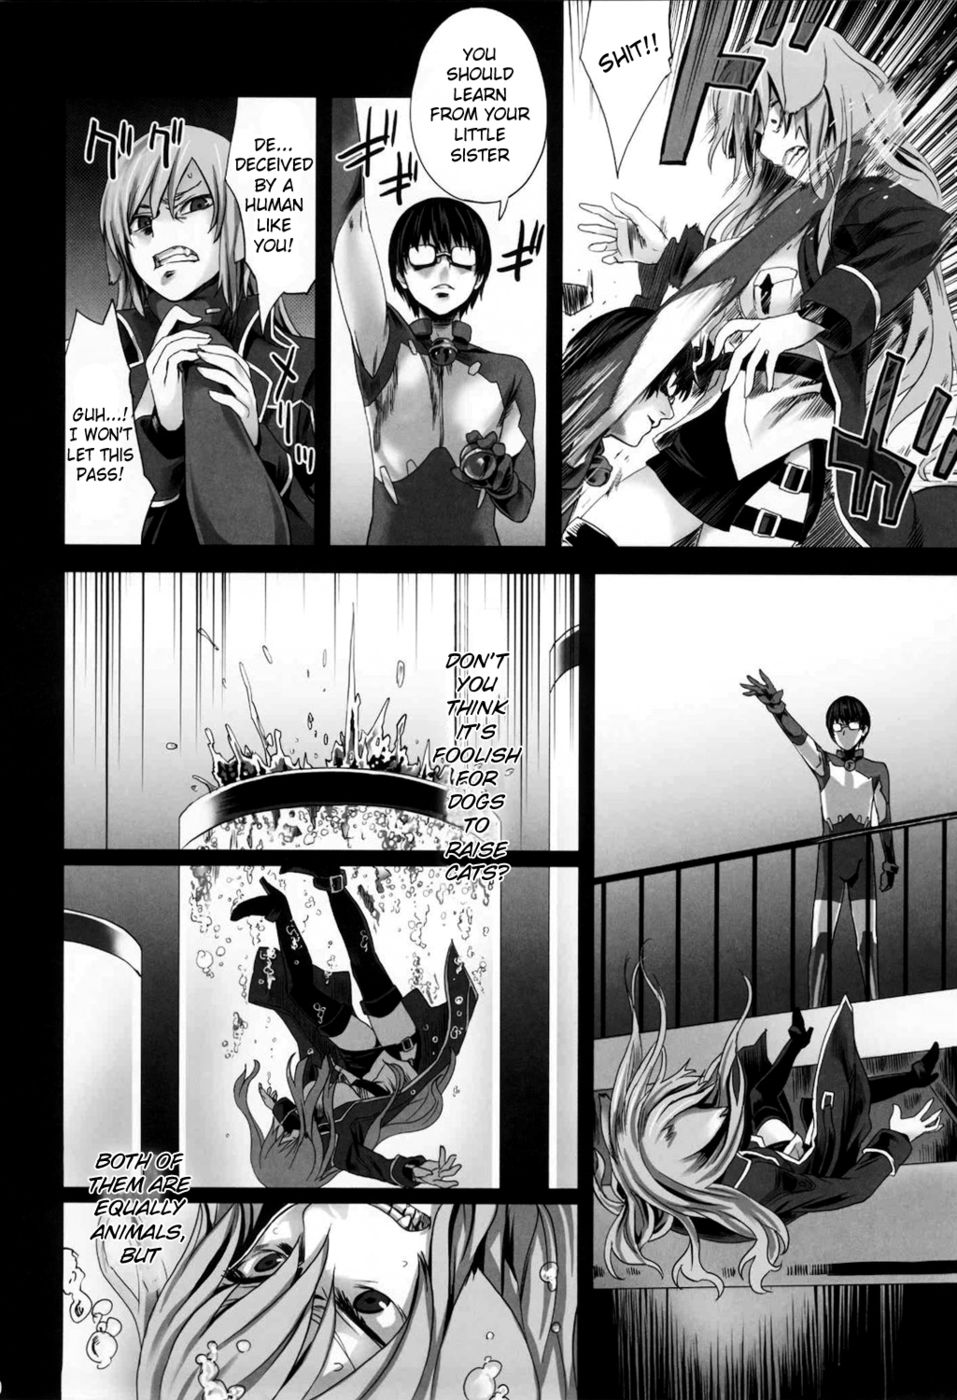 Xxx4d - Victim Girls 10 - It's Training Cats And Dogs-Read-Hentai Manga Hentai  Comic - Page: 30 - Online porn video at mobile